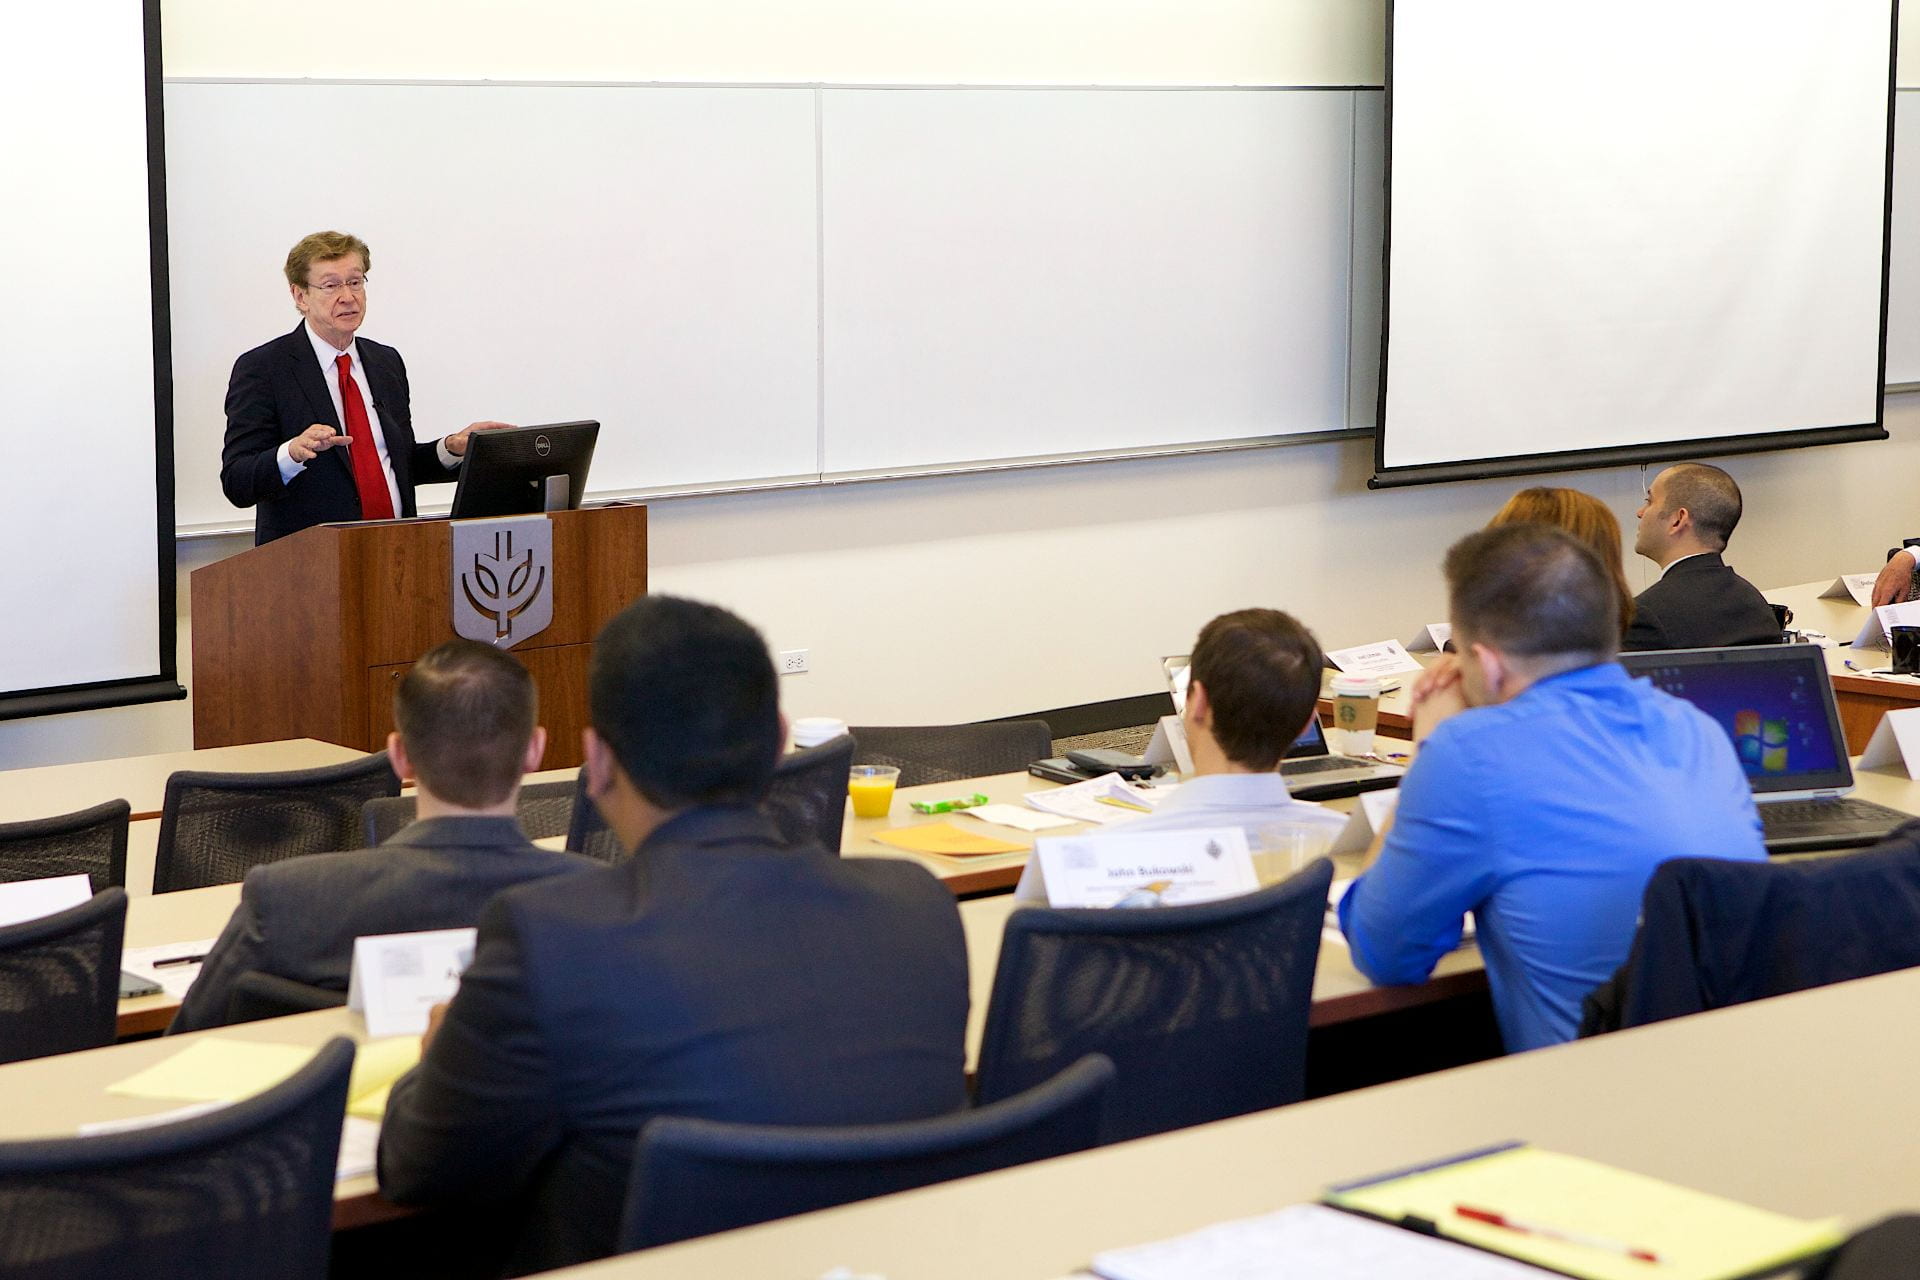 Driehaus shared his investment philosophy as a guest speaker at the college in 2014. | Photo by Jeff Carrion